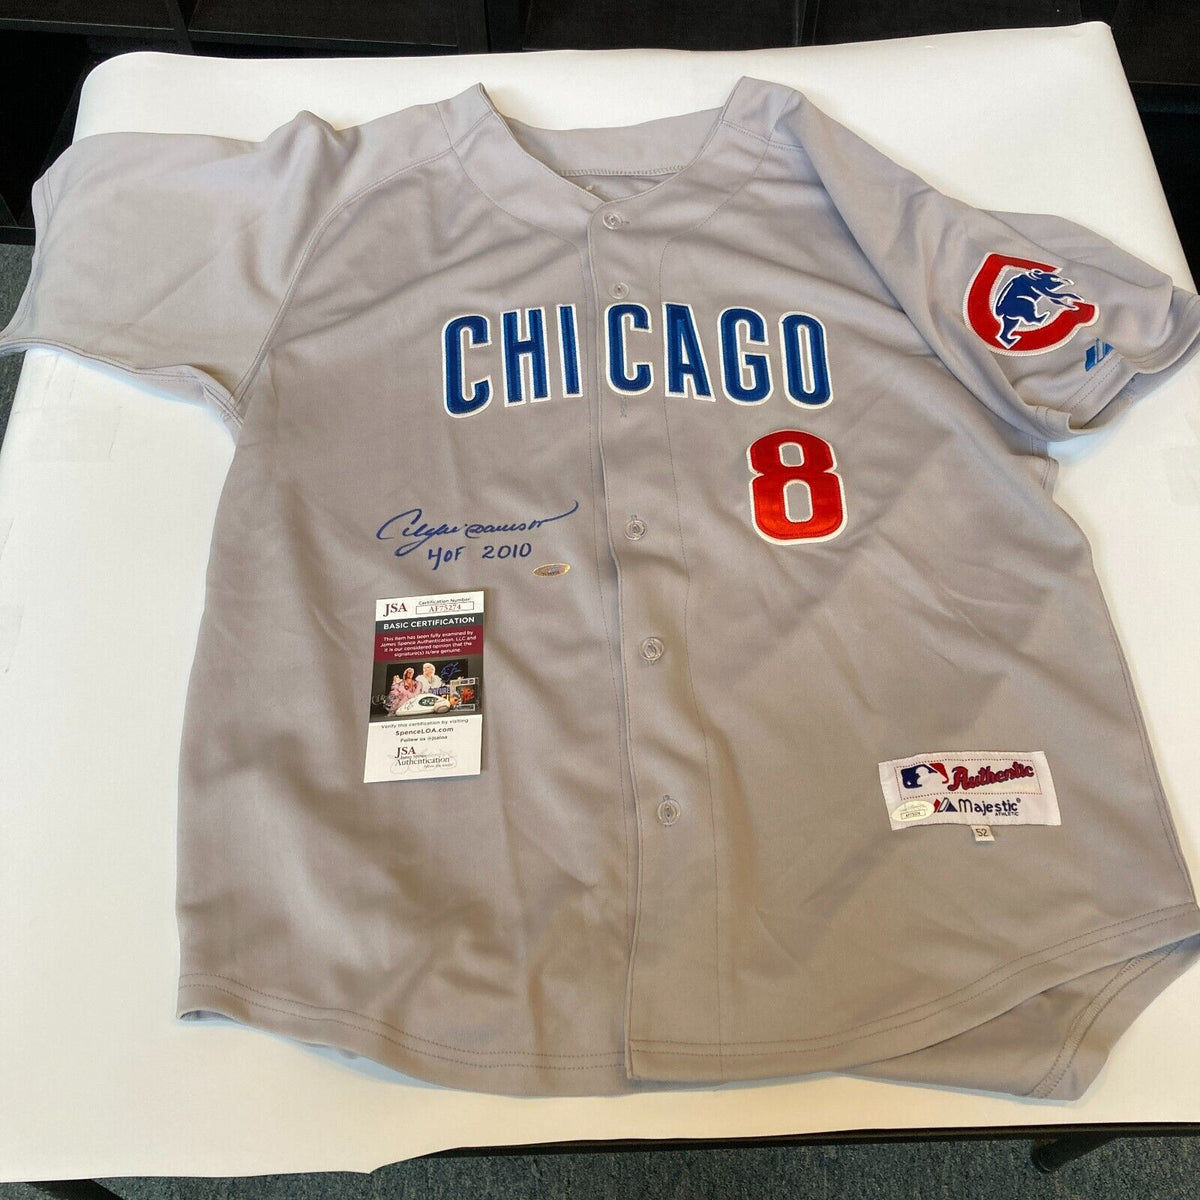 Andre Dawson signed 1990's Chicago Cubs Home Jersey w/ HOF 2010 INSC. JSA